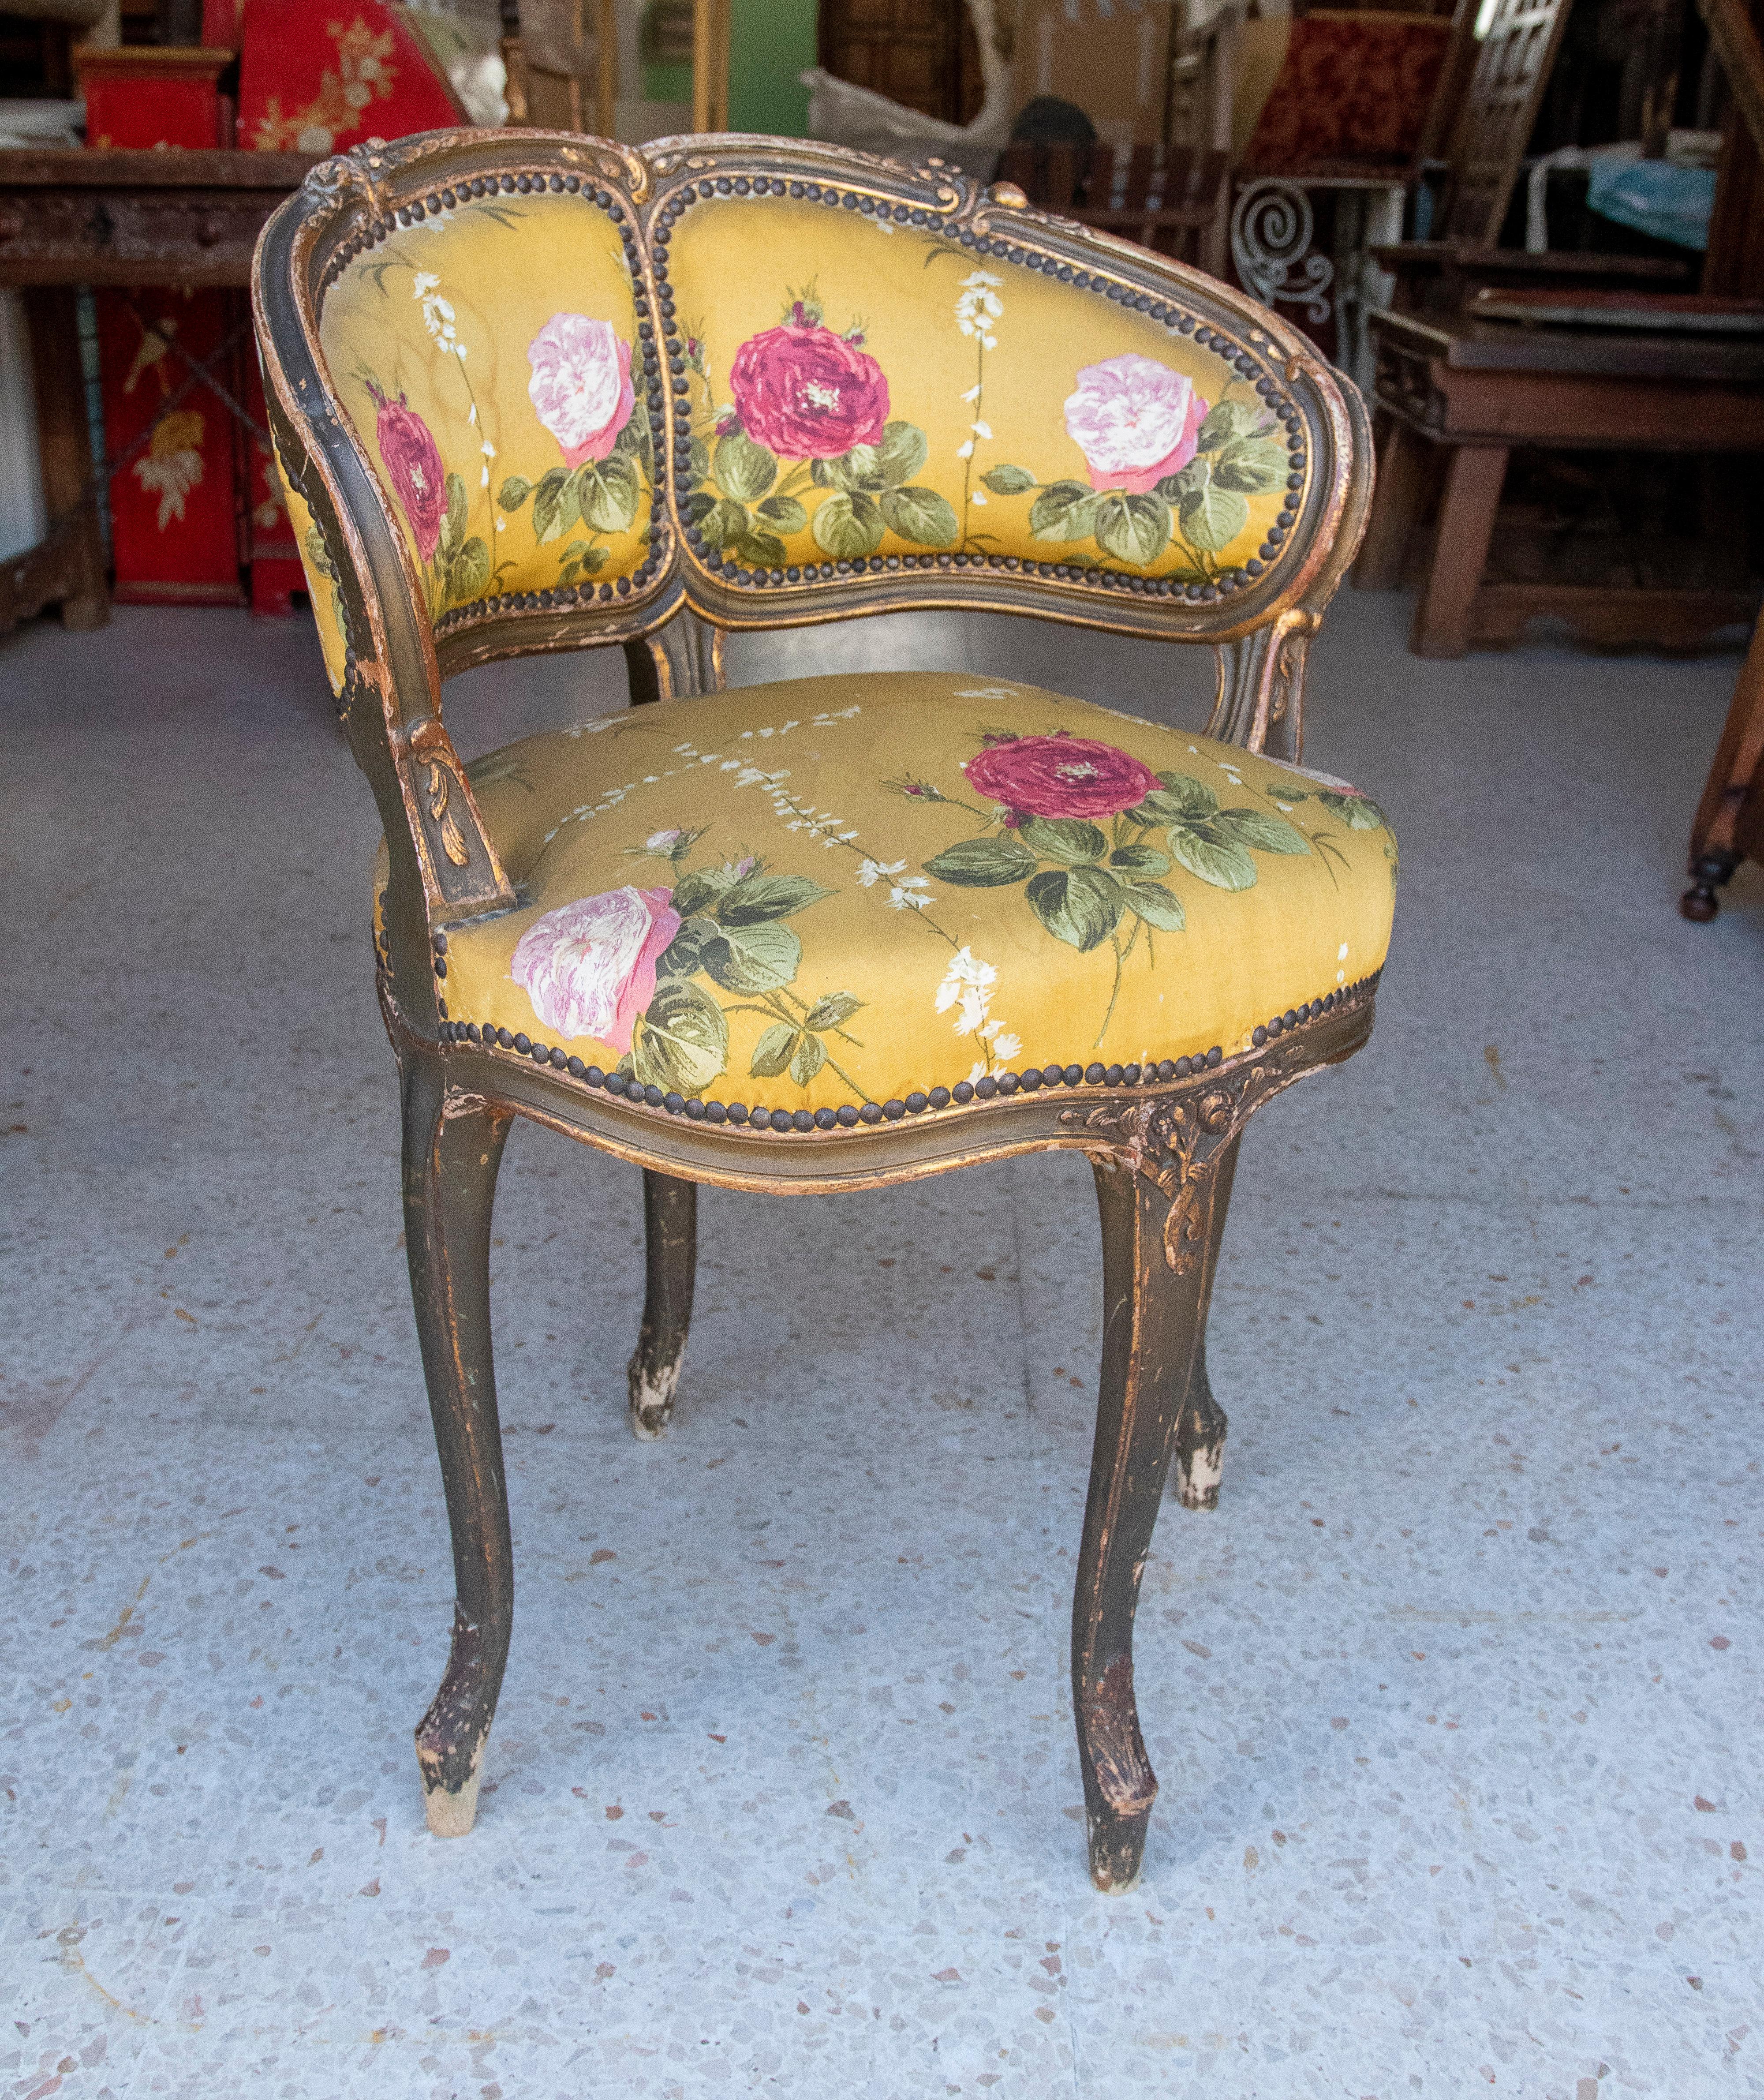 19th Century French upholstered wooden corner chair.